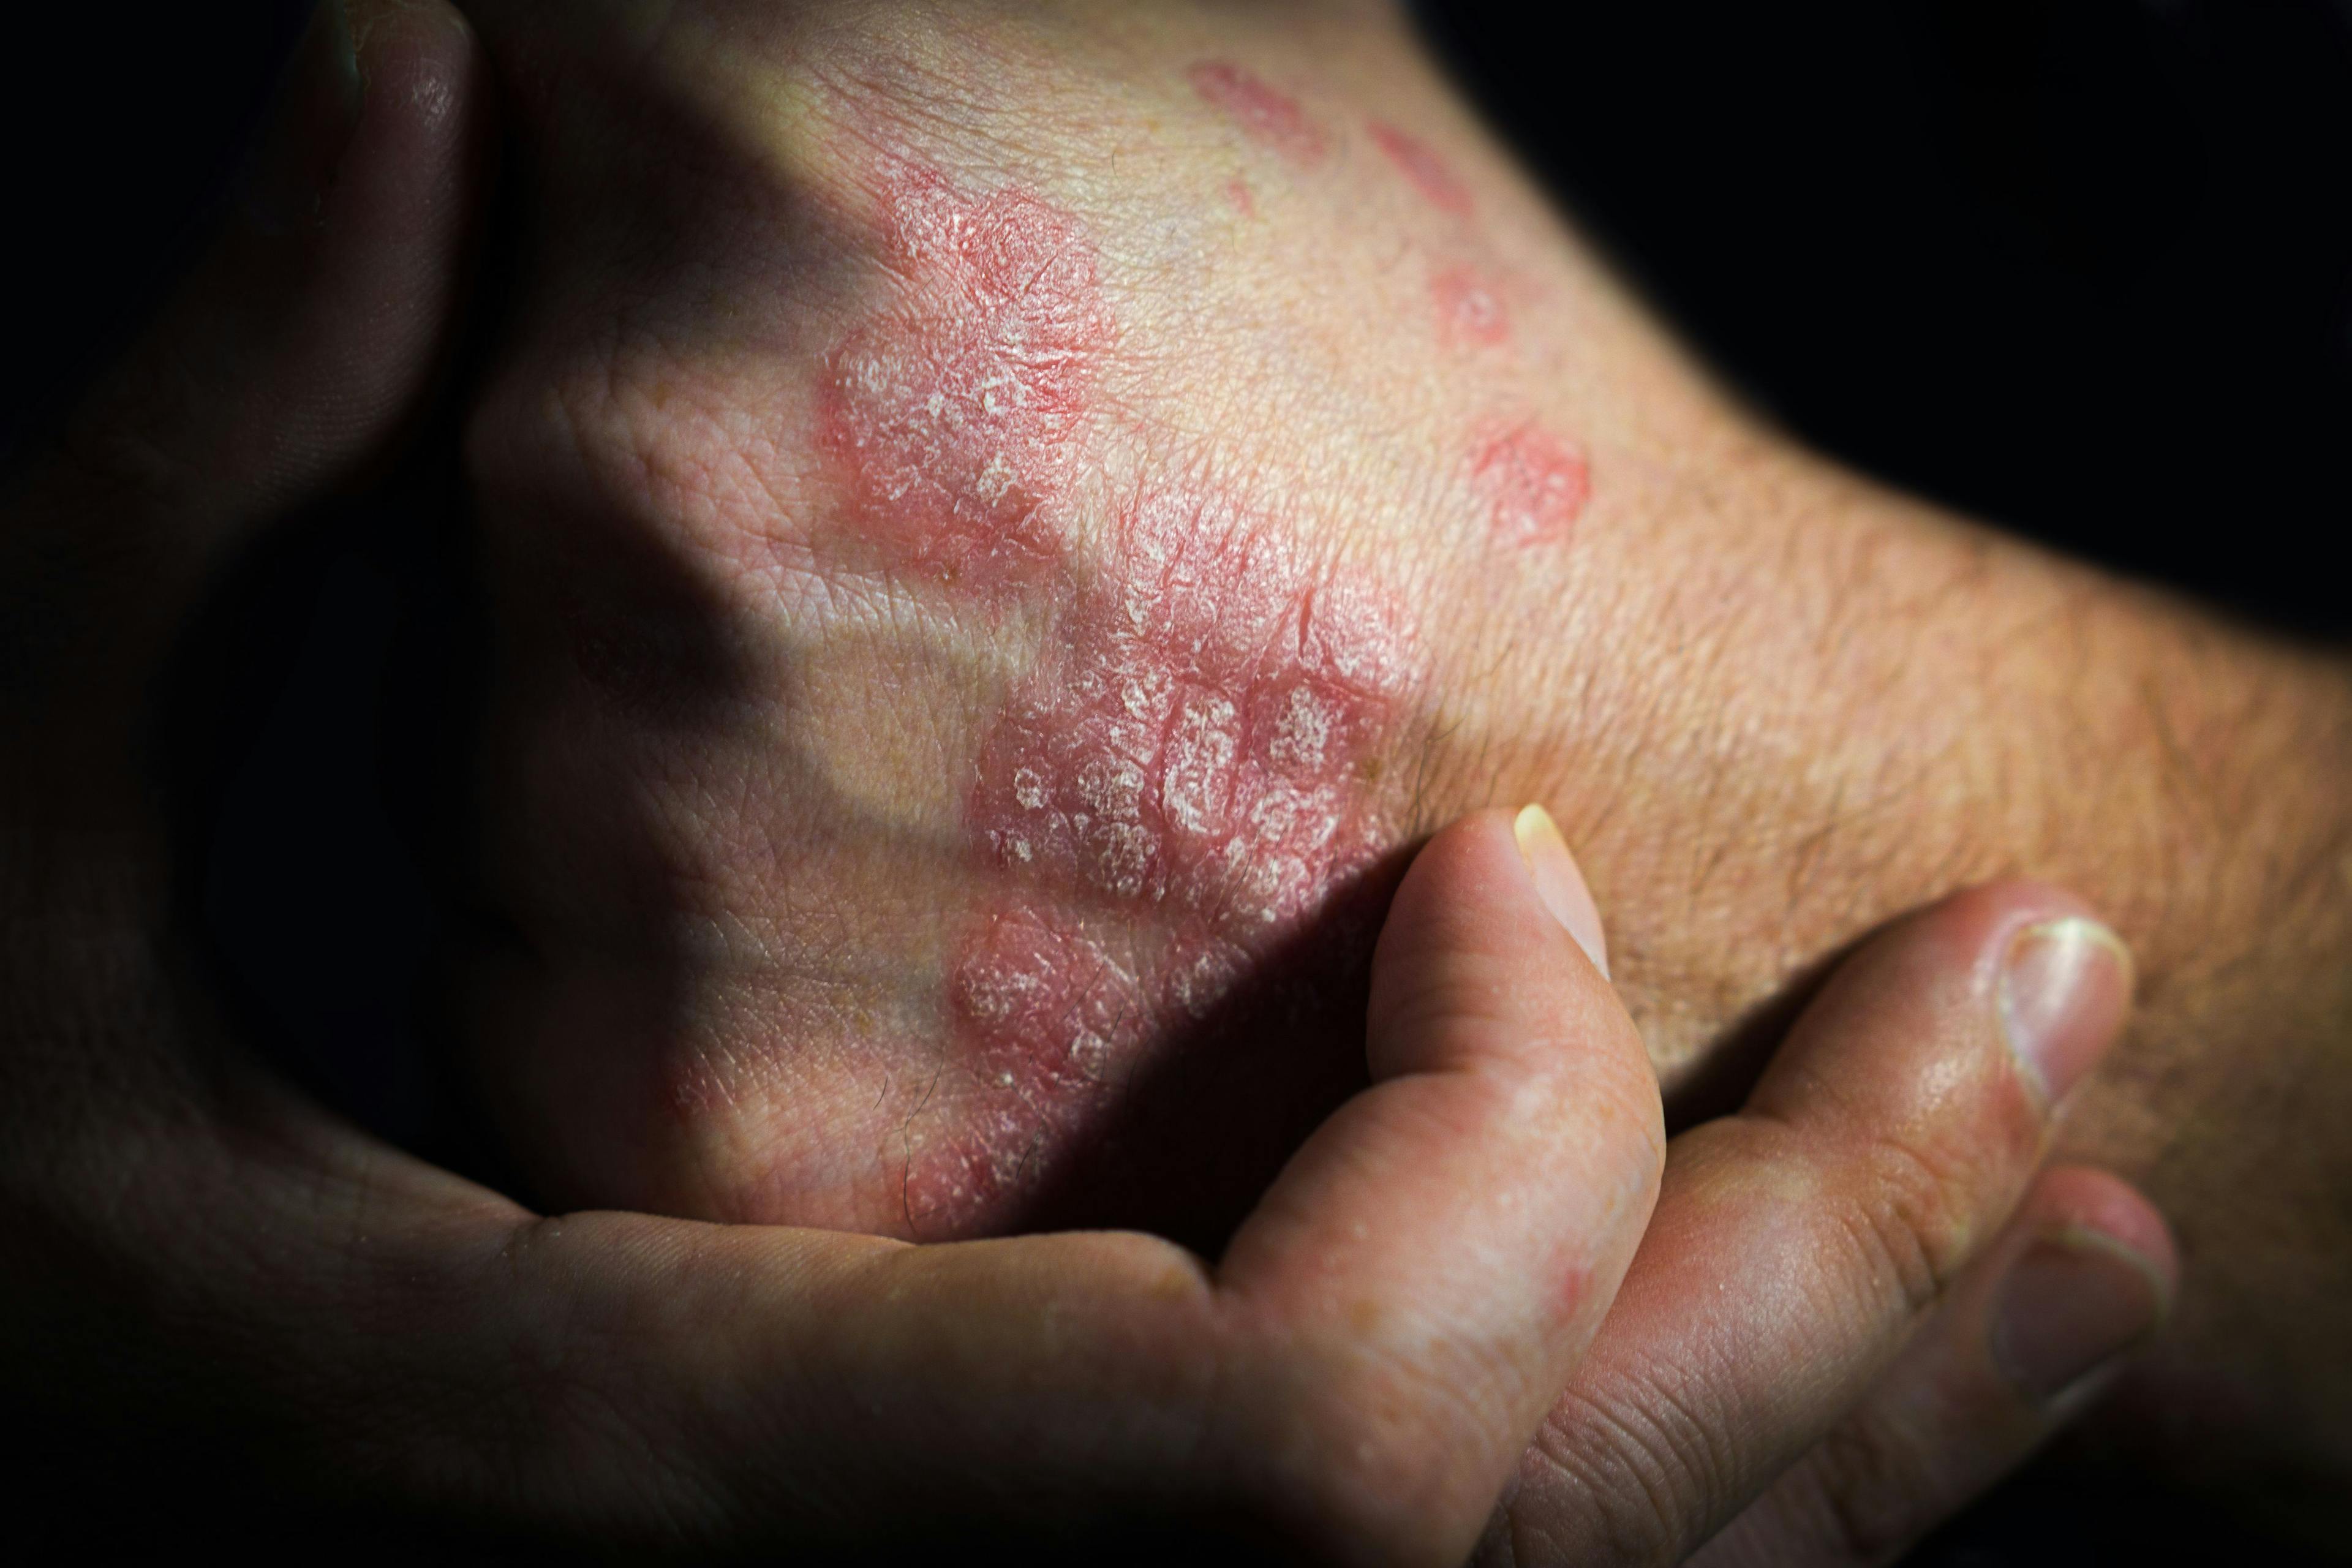 Low Stress Resilience in Men Linked to Higher Risk of Psoriasis and Psoriatic Arthritis